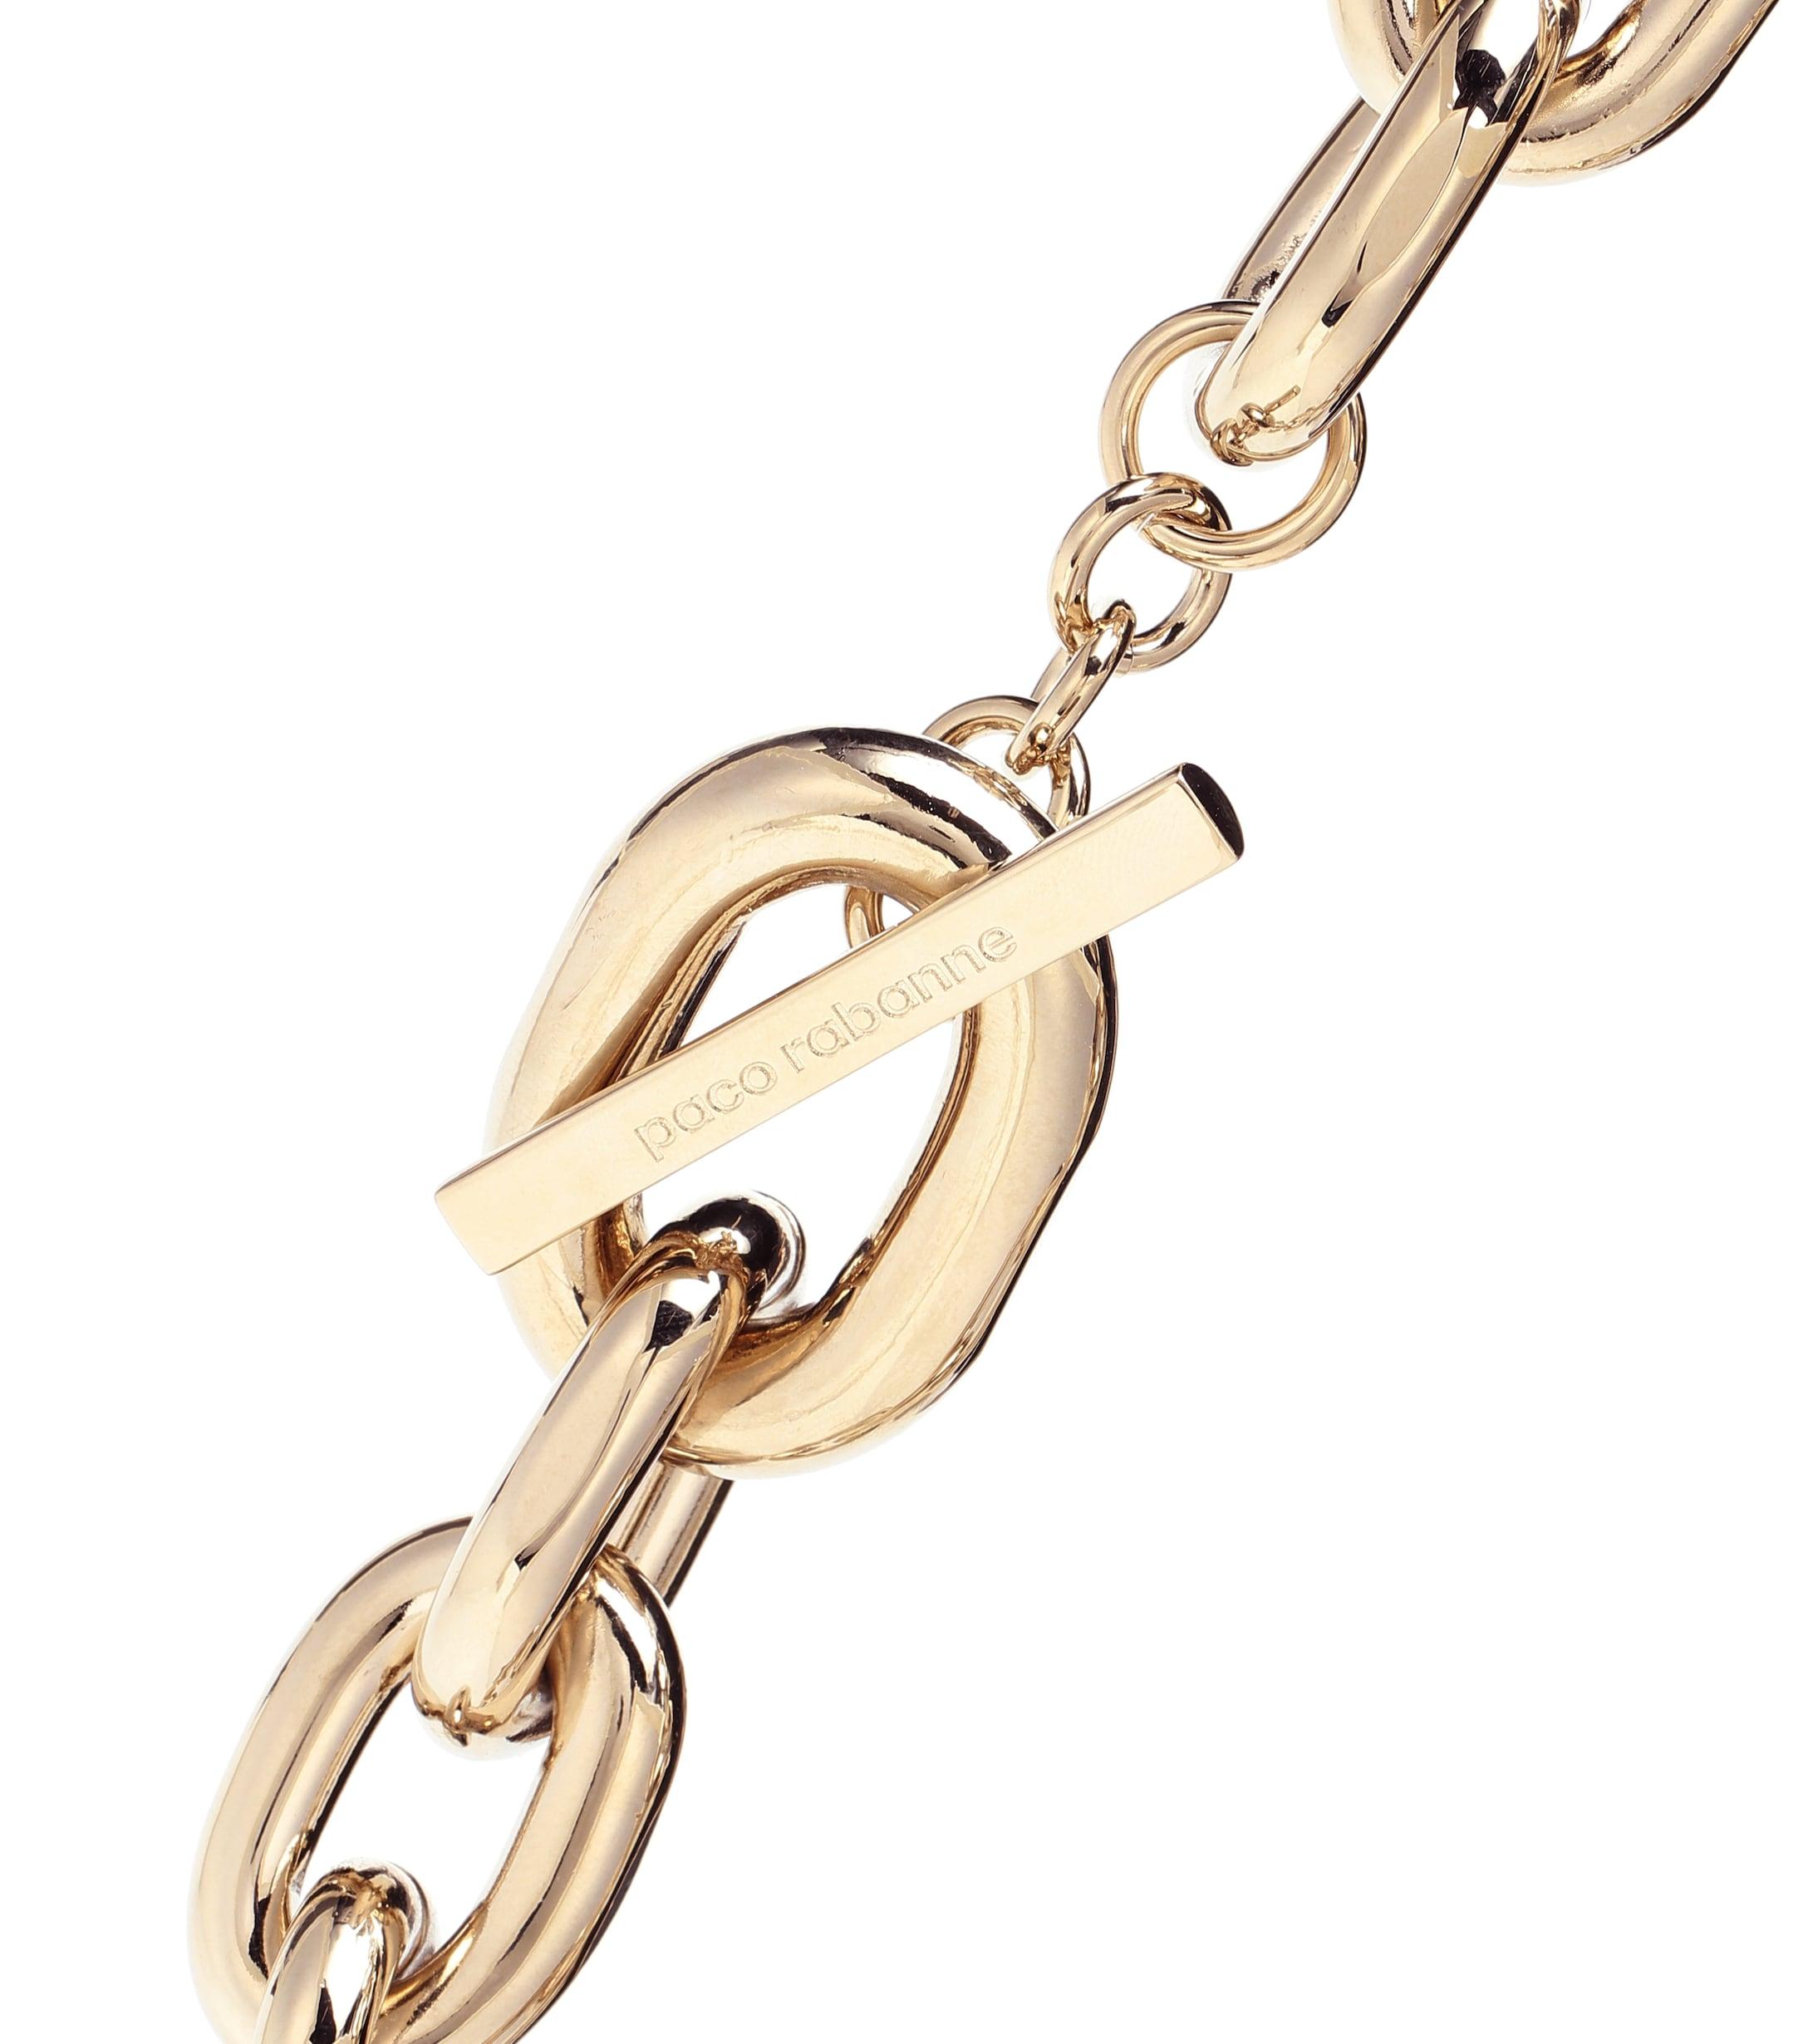 Paco Rabanne Chain Link Necklace in Gold (Metallic) - Lyst